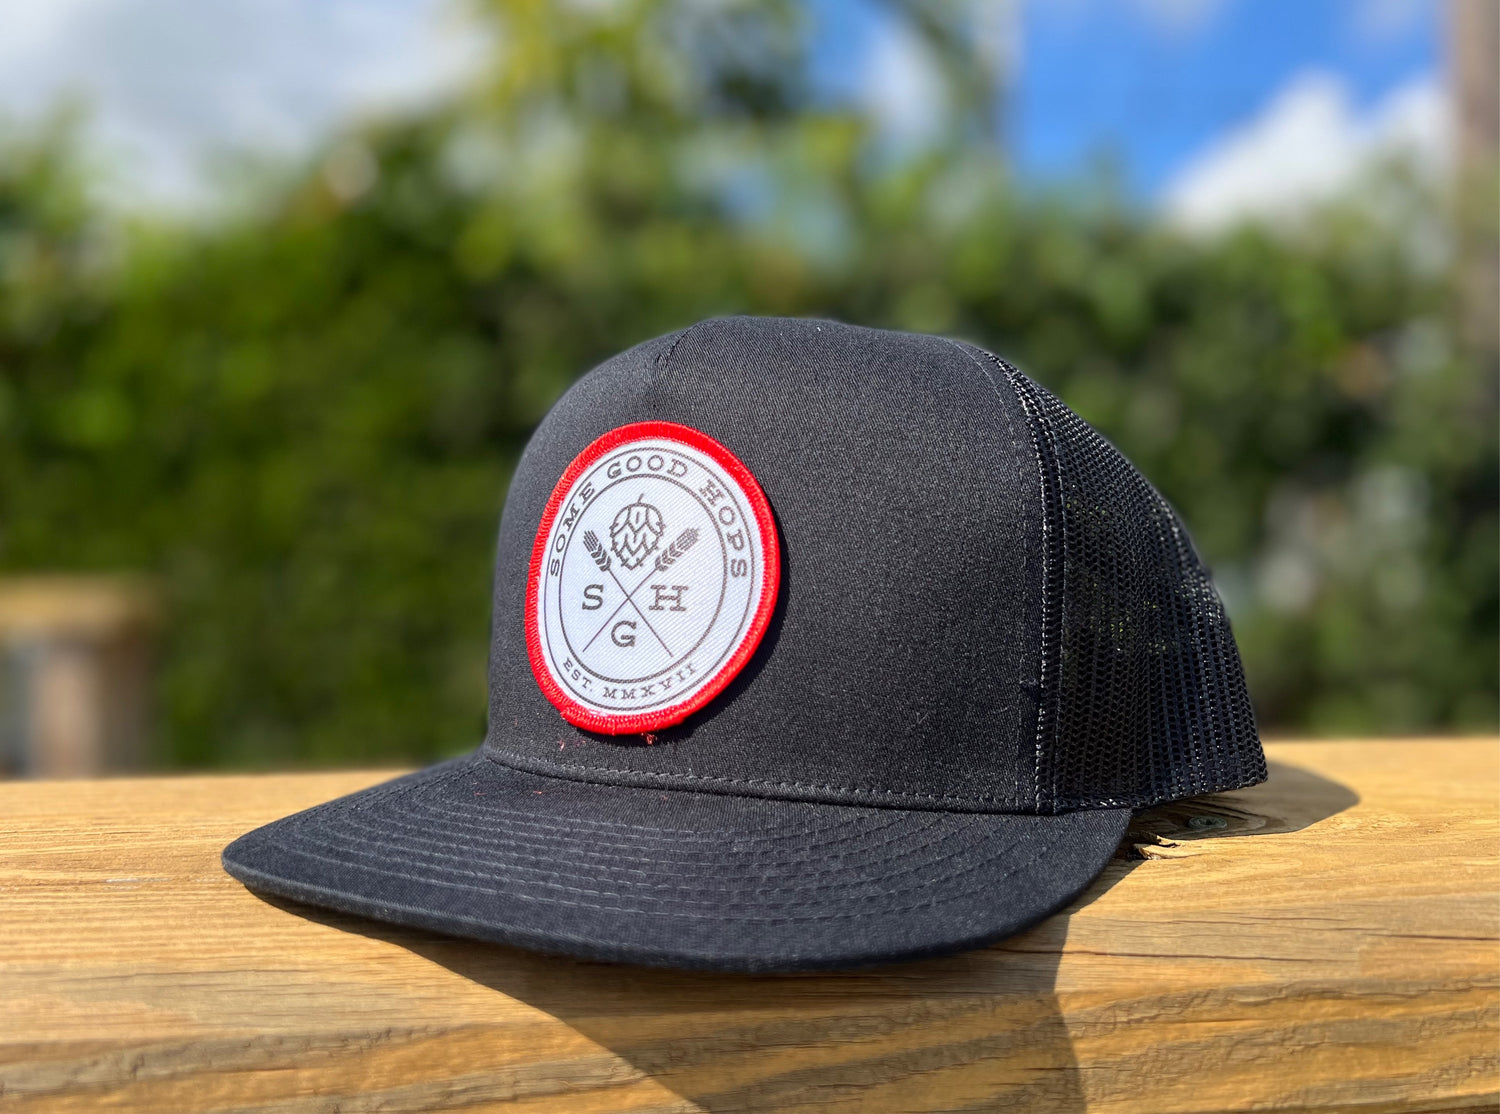 Some Good Hops Black Snapback Hat with White Logo and Red Stitch - Some Good Hops